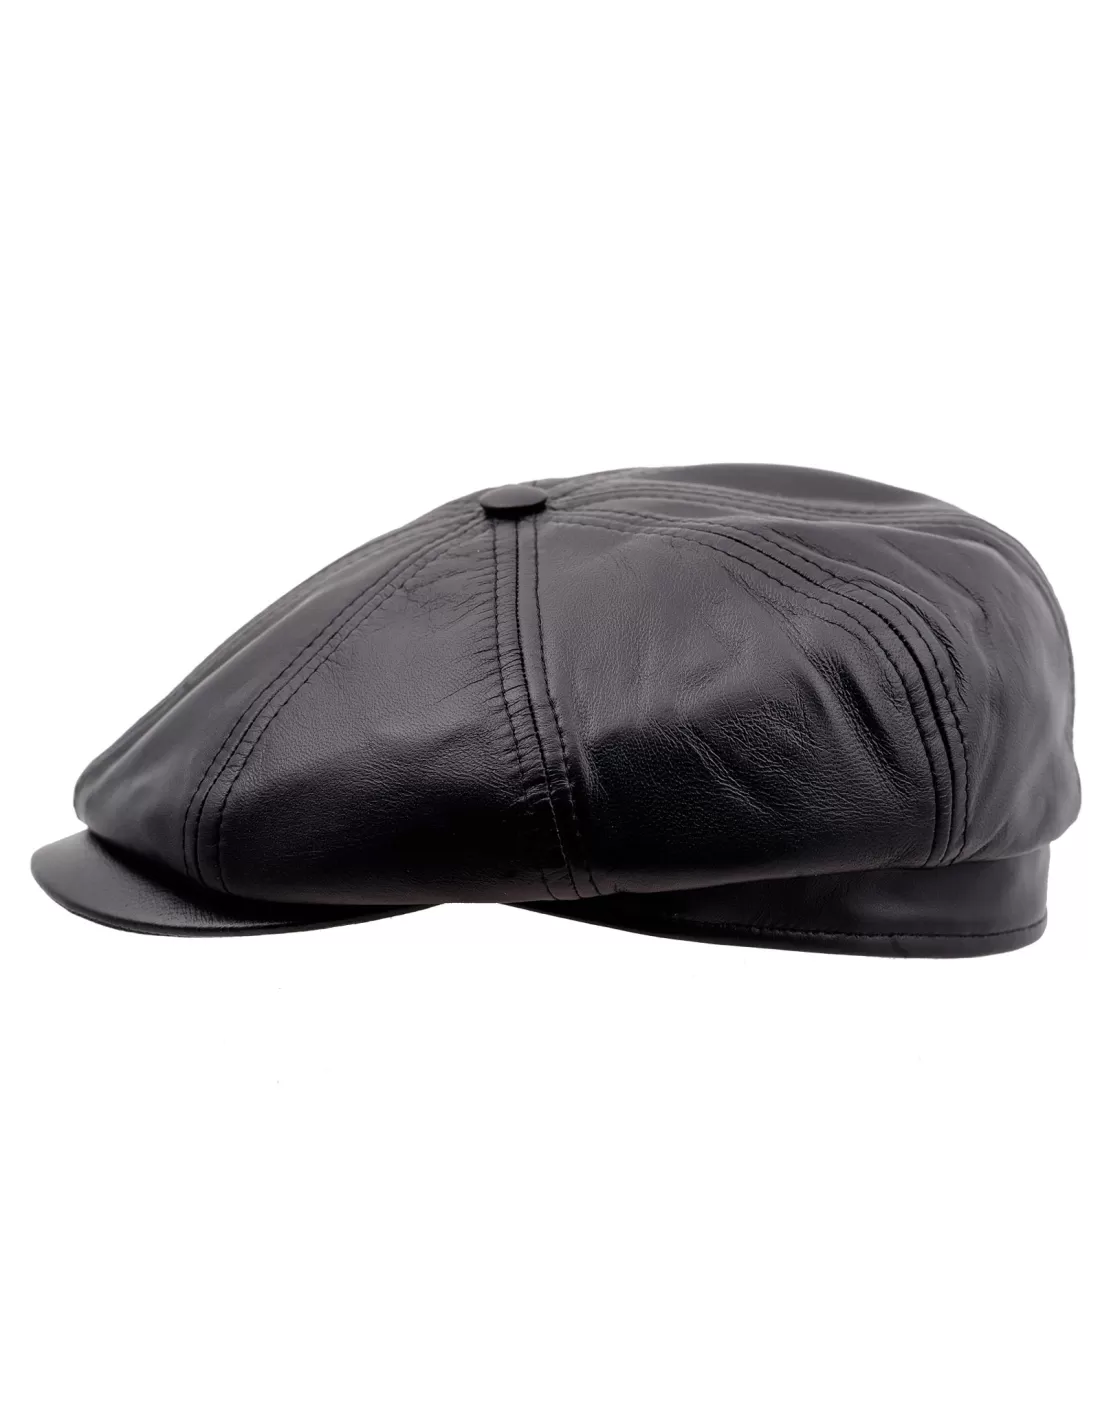 Malone - genuine leather eight panels Gatsby winter cap with breathable  lining